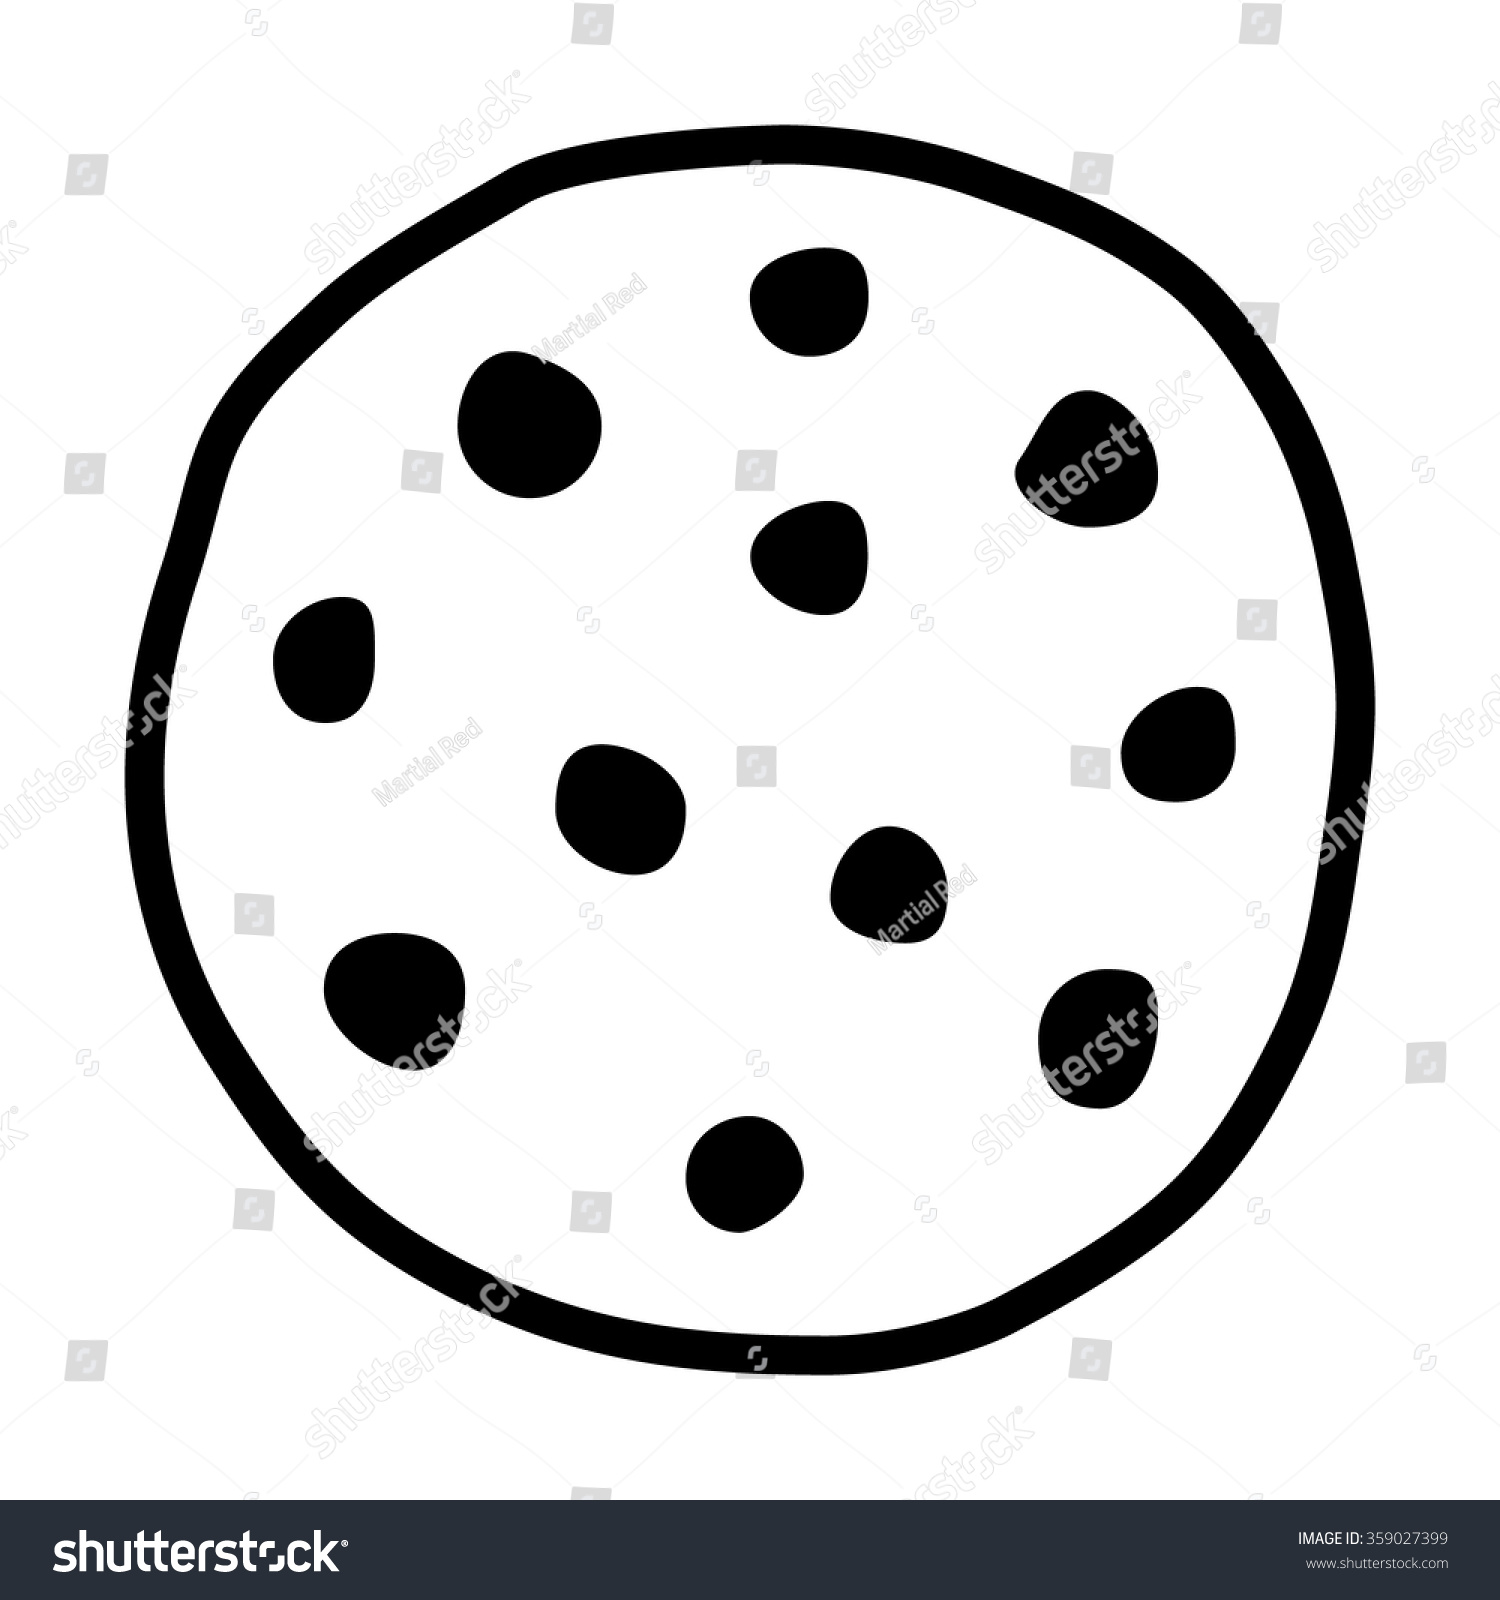 free cookie clipart black and white - photo #39